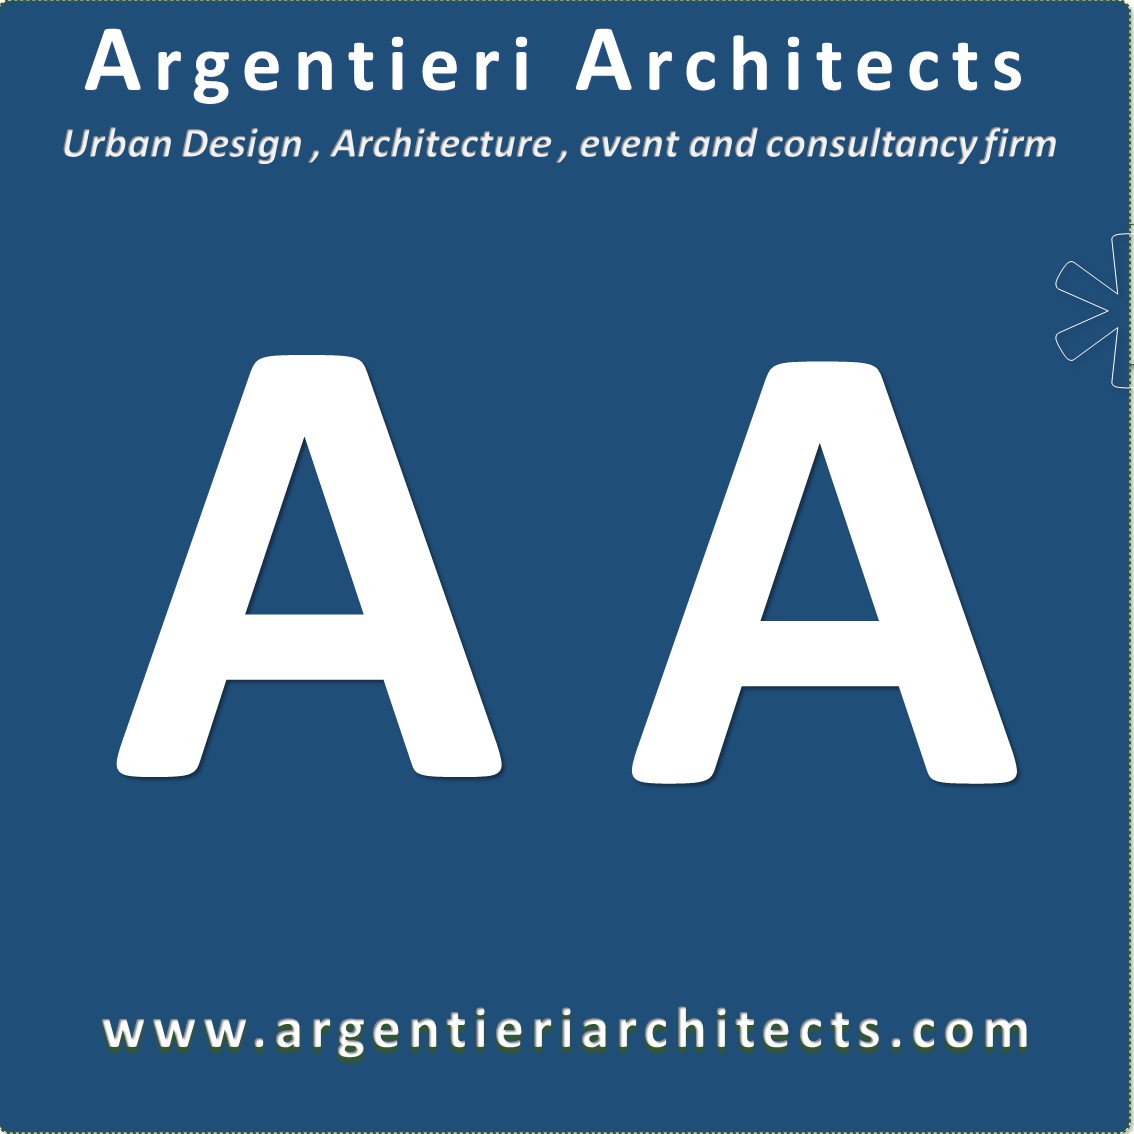 People- Argentieri Architects is an innovation and design firm. International expert on urban strategies & development, Smart Cities, architecture , retail and hospitality  